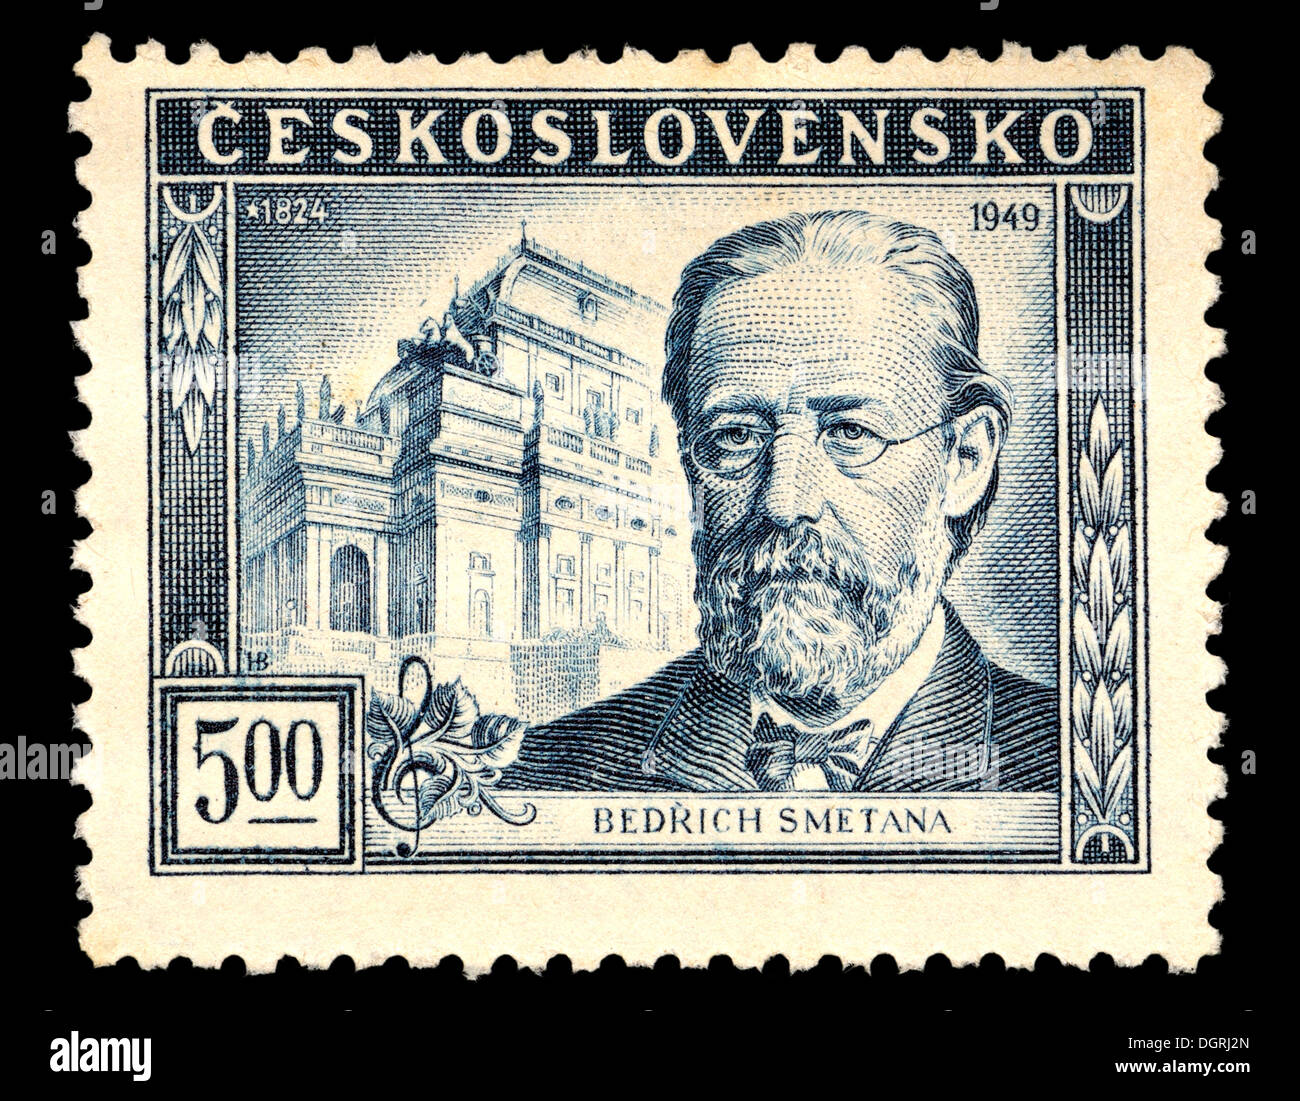 Postage stamp from Czechoslovakia - Bedrich Smetana (1824-84) Czech composer, in front of the National Theatre, Prague Stock Photo